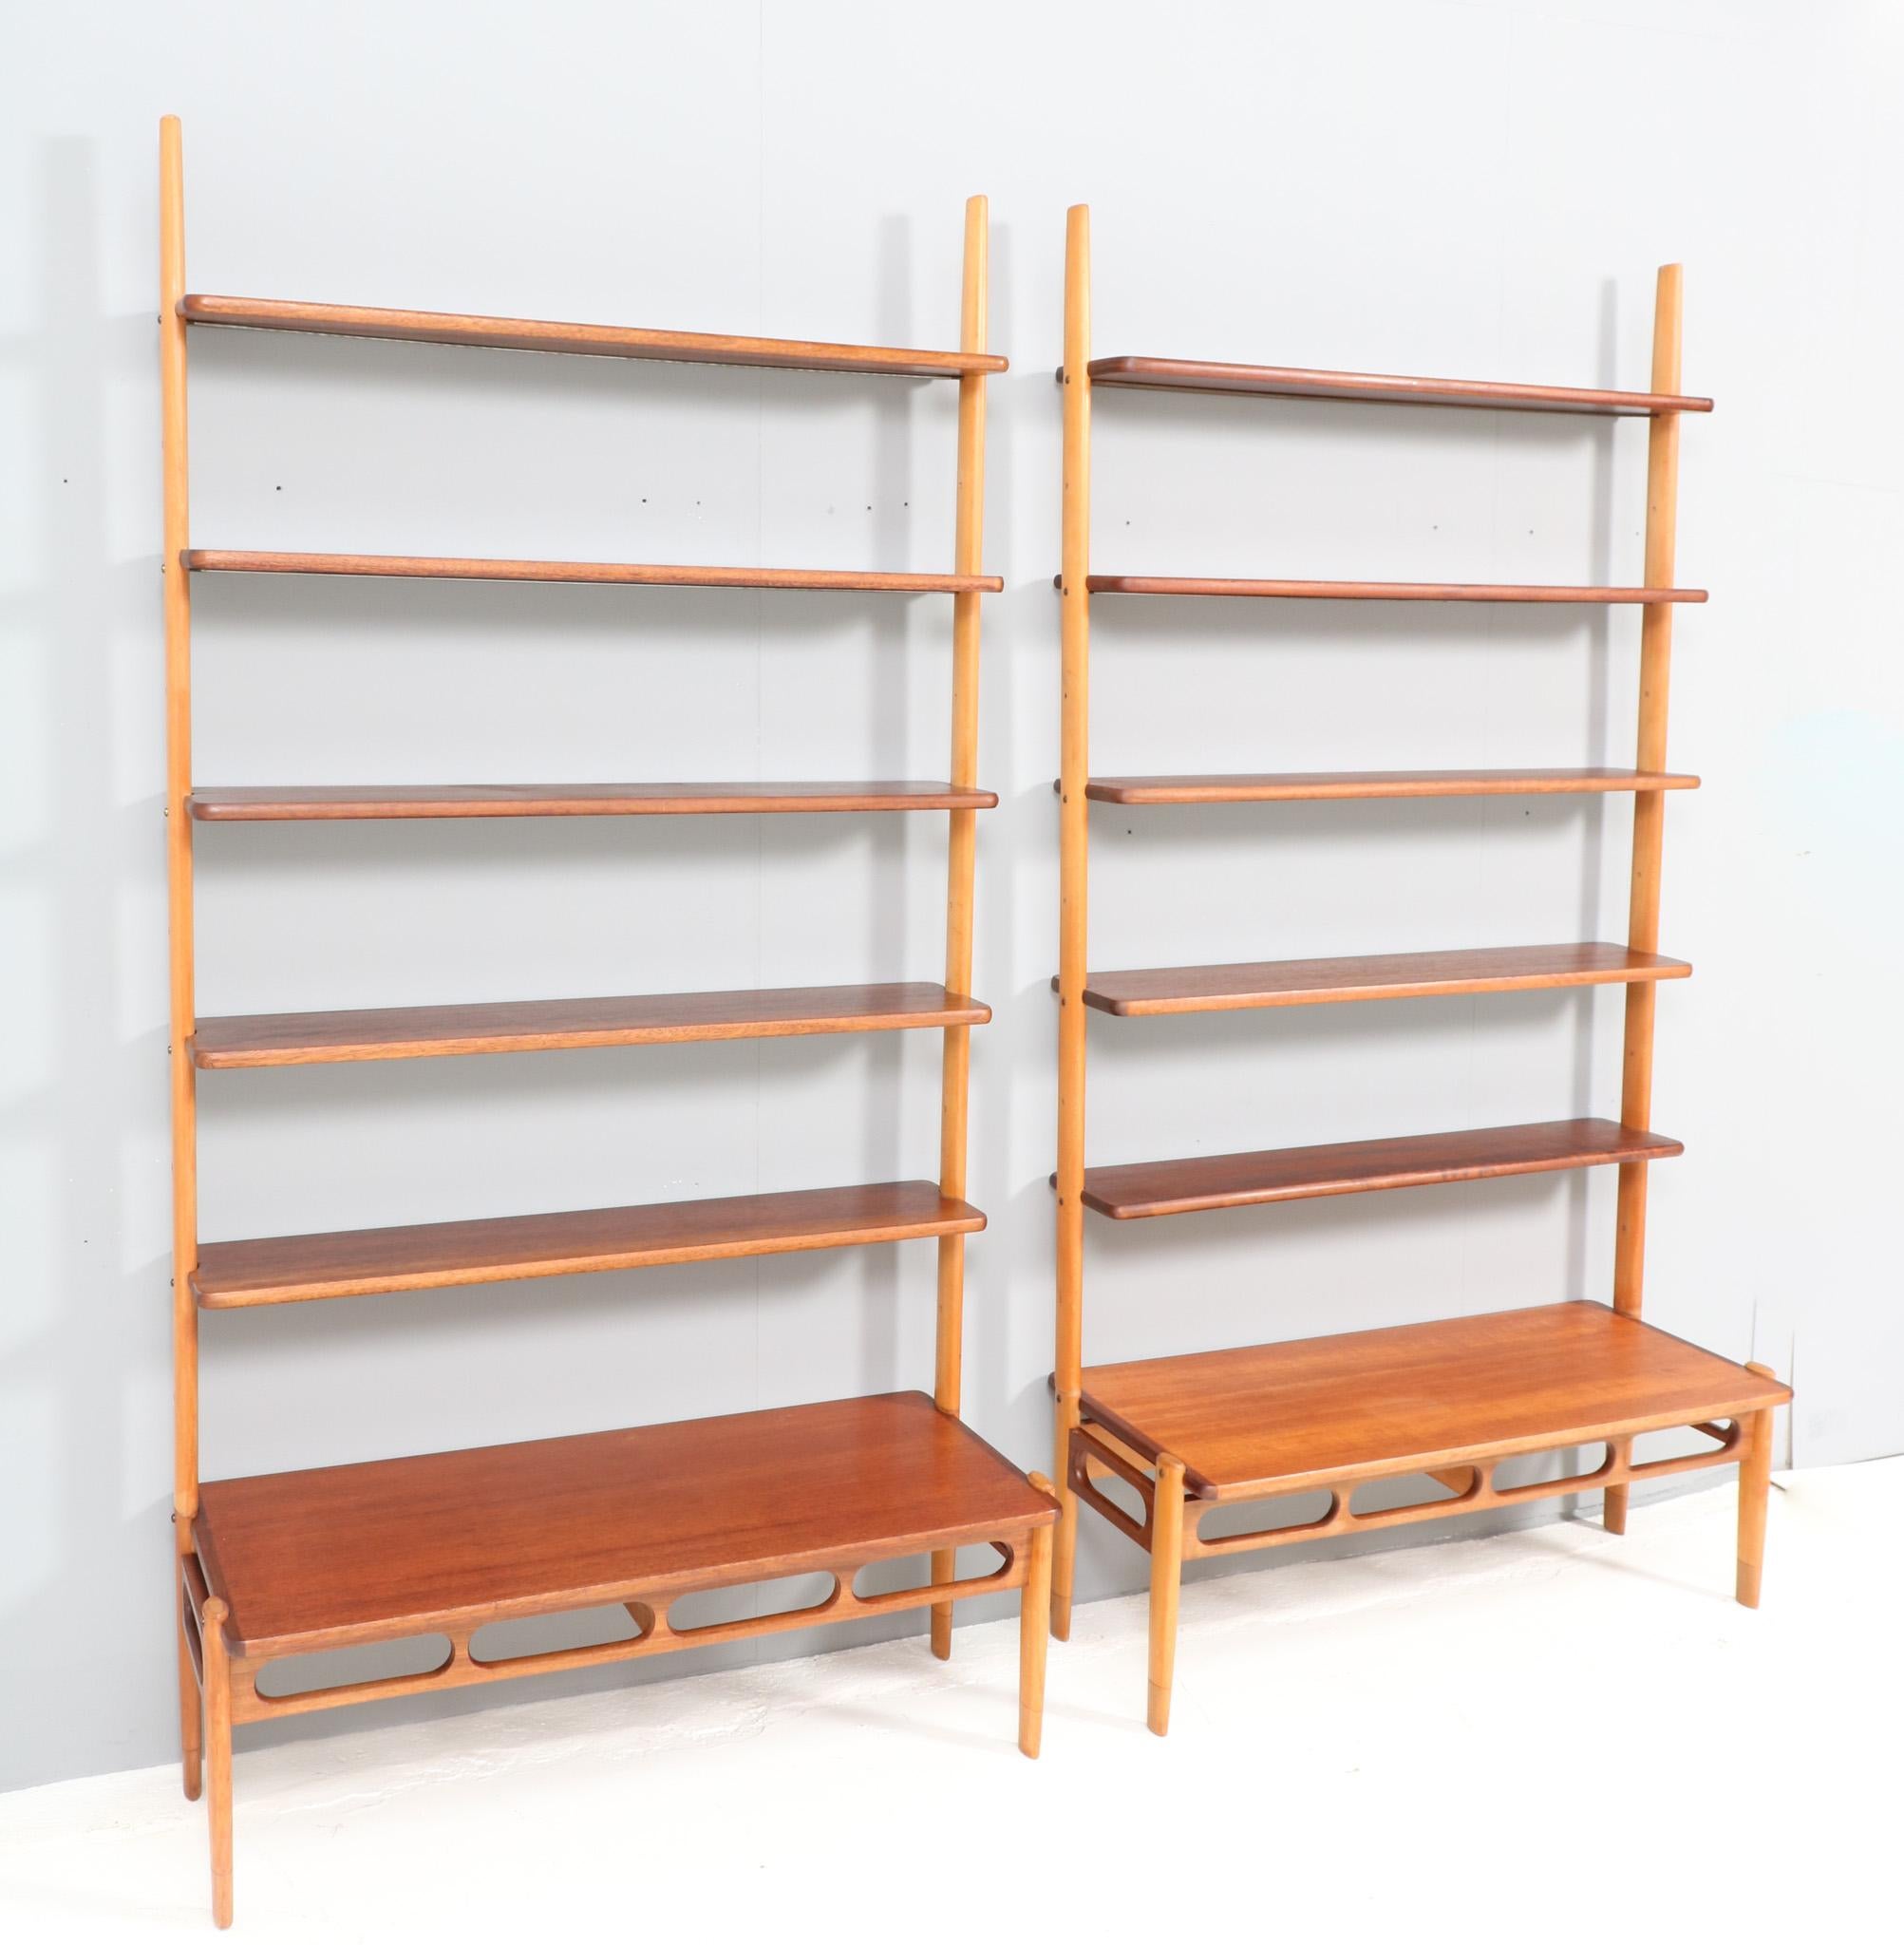 Mid-20th Century Mid-Century Modern Pair of Wall Units by William Watting for Scanflex, 1960s For Sale